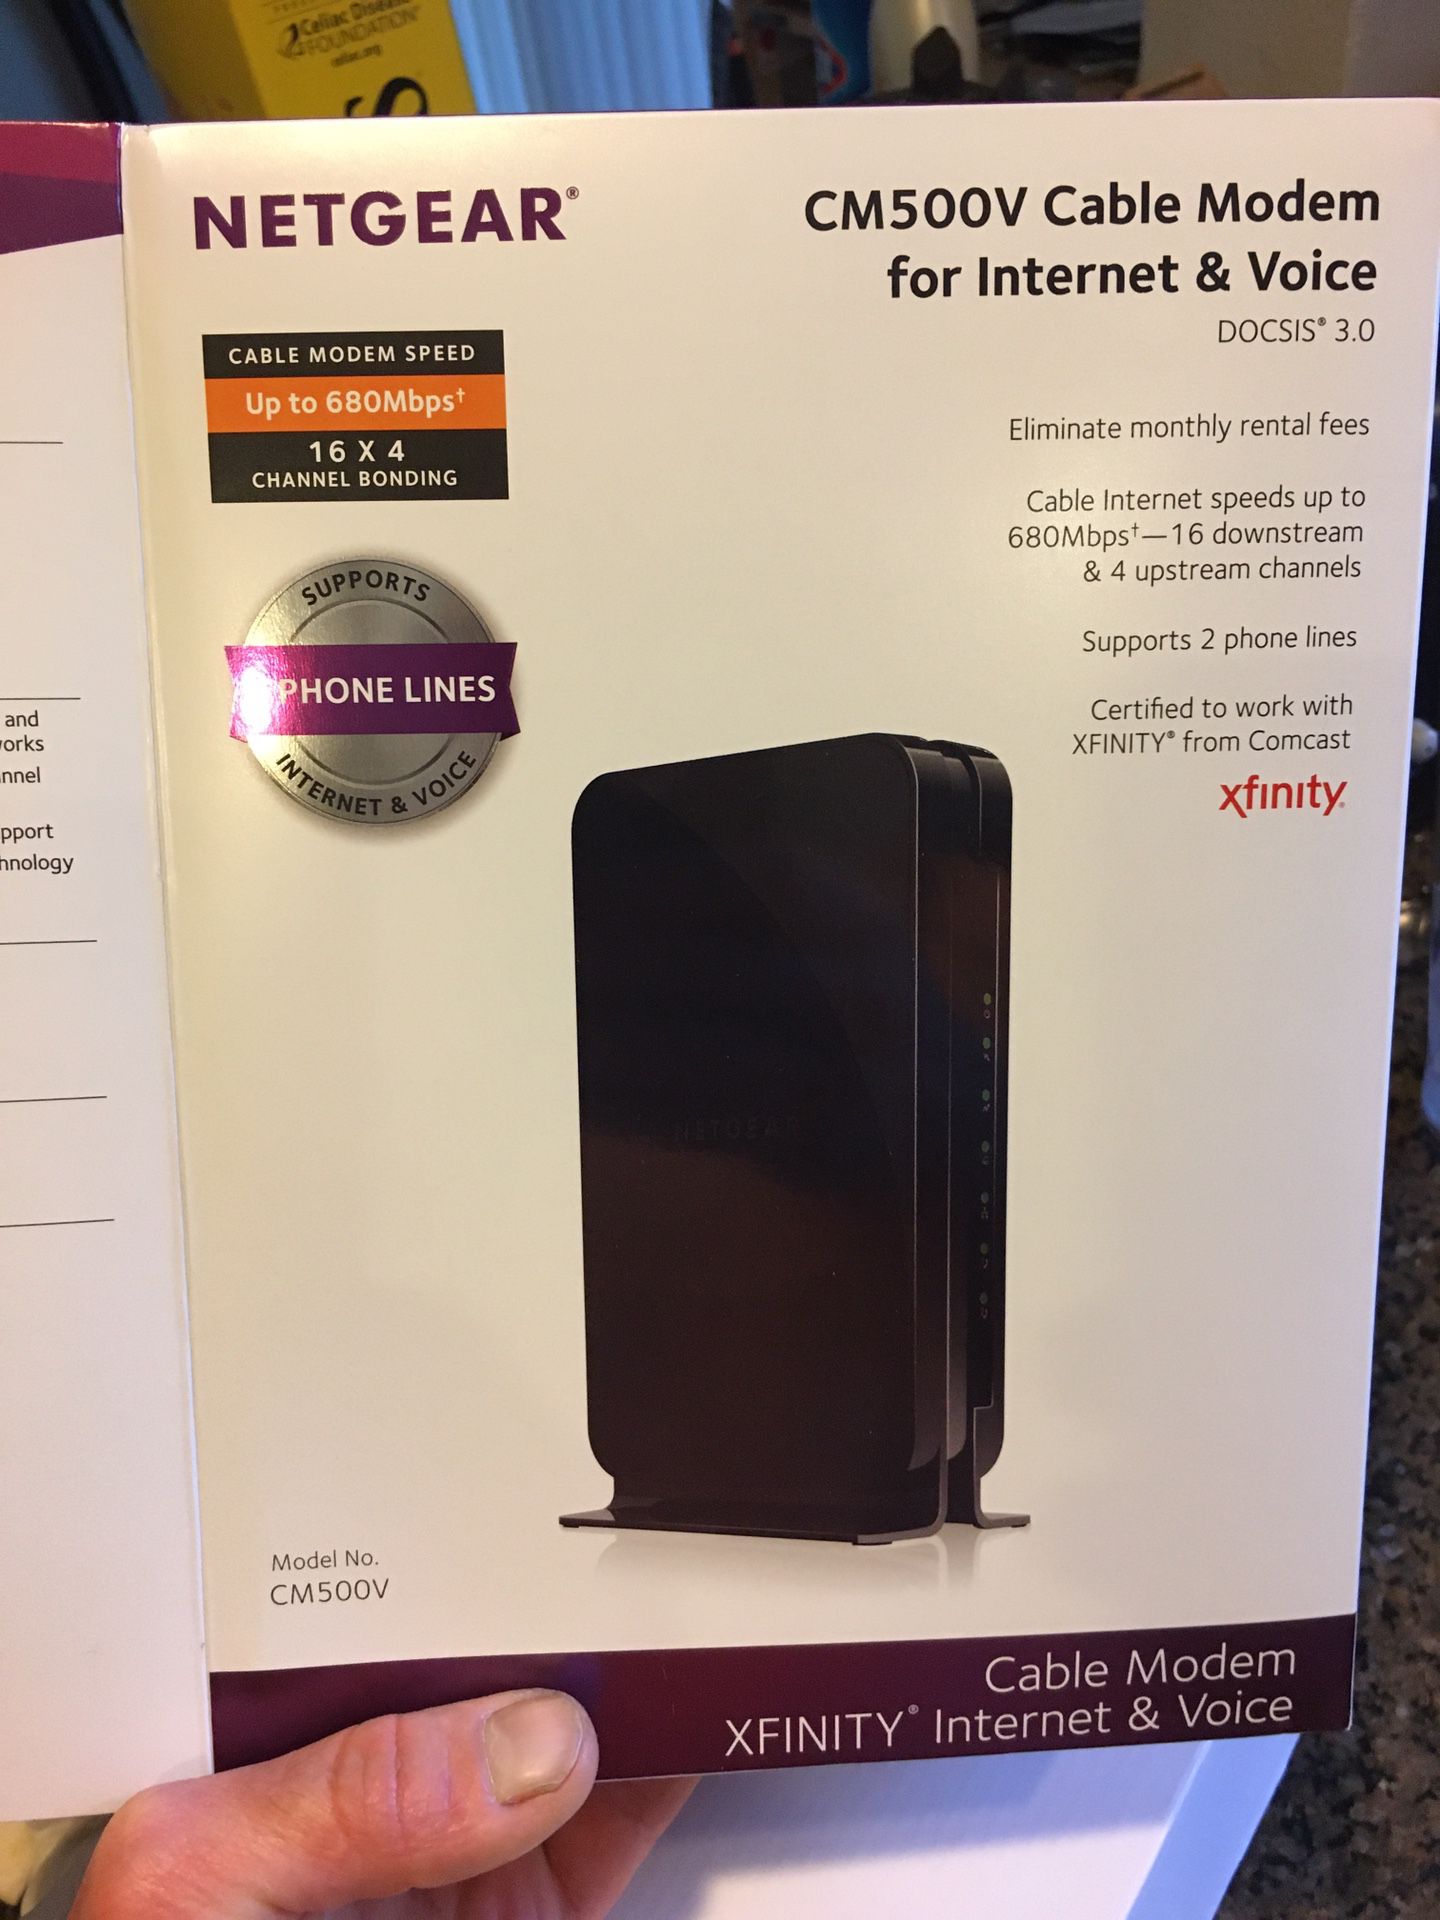 NETGEAR Cable Modem with Voice CM500V - For Xfinity by Comcast Internet & Voice | Supports Cable Plans Up to 300 Mbps | 2 Phone lines | DOCSIS 3.0